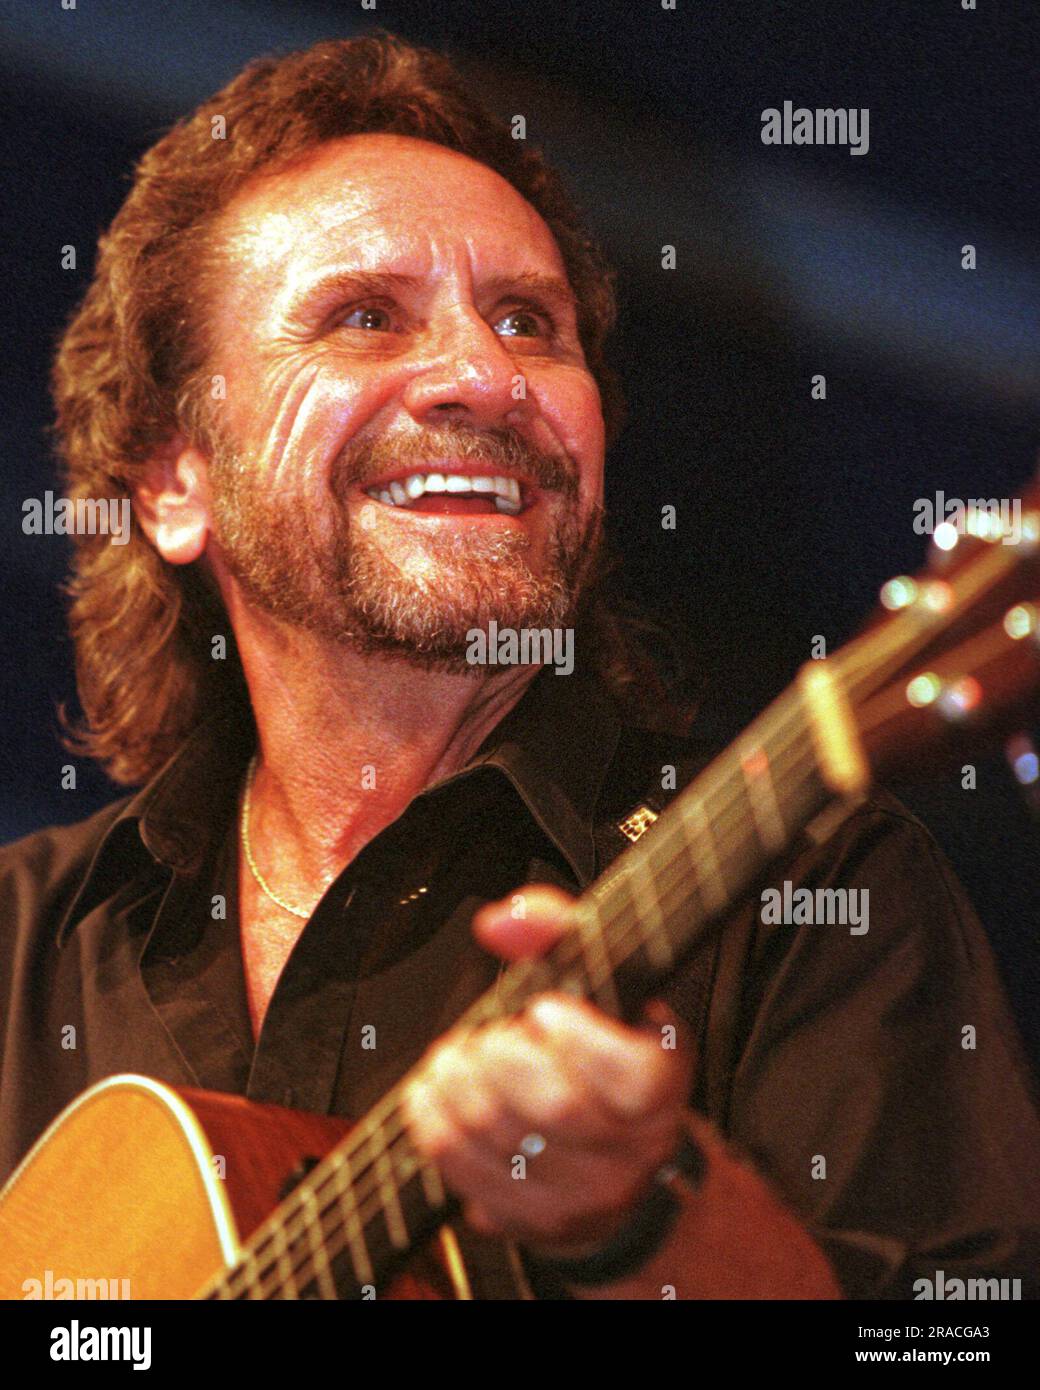 David Frizzell, 57, performs during the Lakefest Fourth of July Celebration on Saturday, July 3, 1999 in Jamestown, Russell County, KY, USA. The younger brother of country singer-songwriter Lefty Frizzell and a native of El Dorado, AR, David Frizzell is perhaps best known for charting two number-one singles on the Billboard Hot Country Songs chart in the 1980s: the 1981 Shelly West duet 'You're the Reason God Made Oklahoma' and the 1982 solo hit 'I'm Gonna Hire a Wino to Decorate Our Home.' (Apex MediaWire Photo by Billy Suratt) Stock Photo